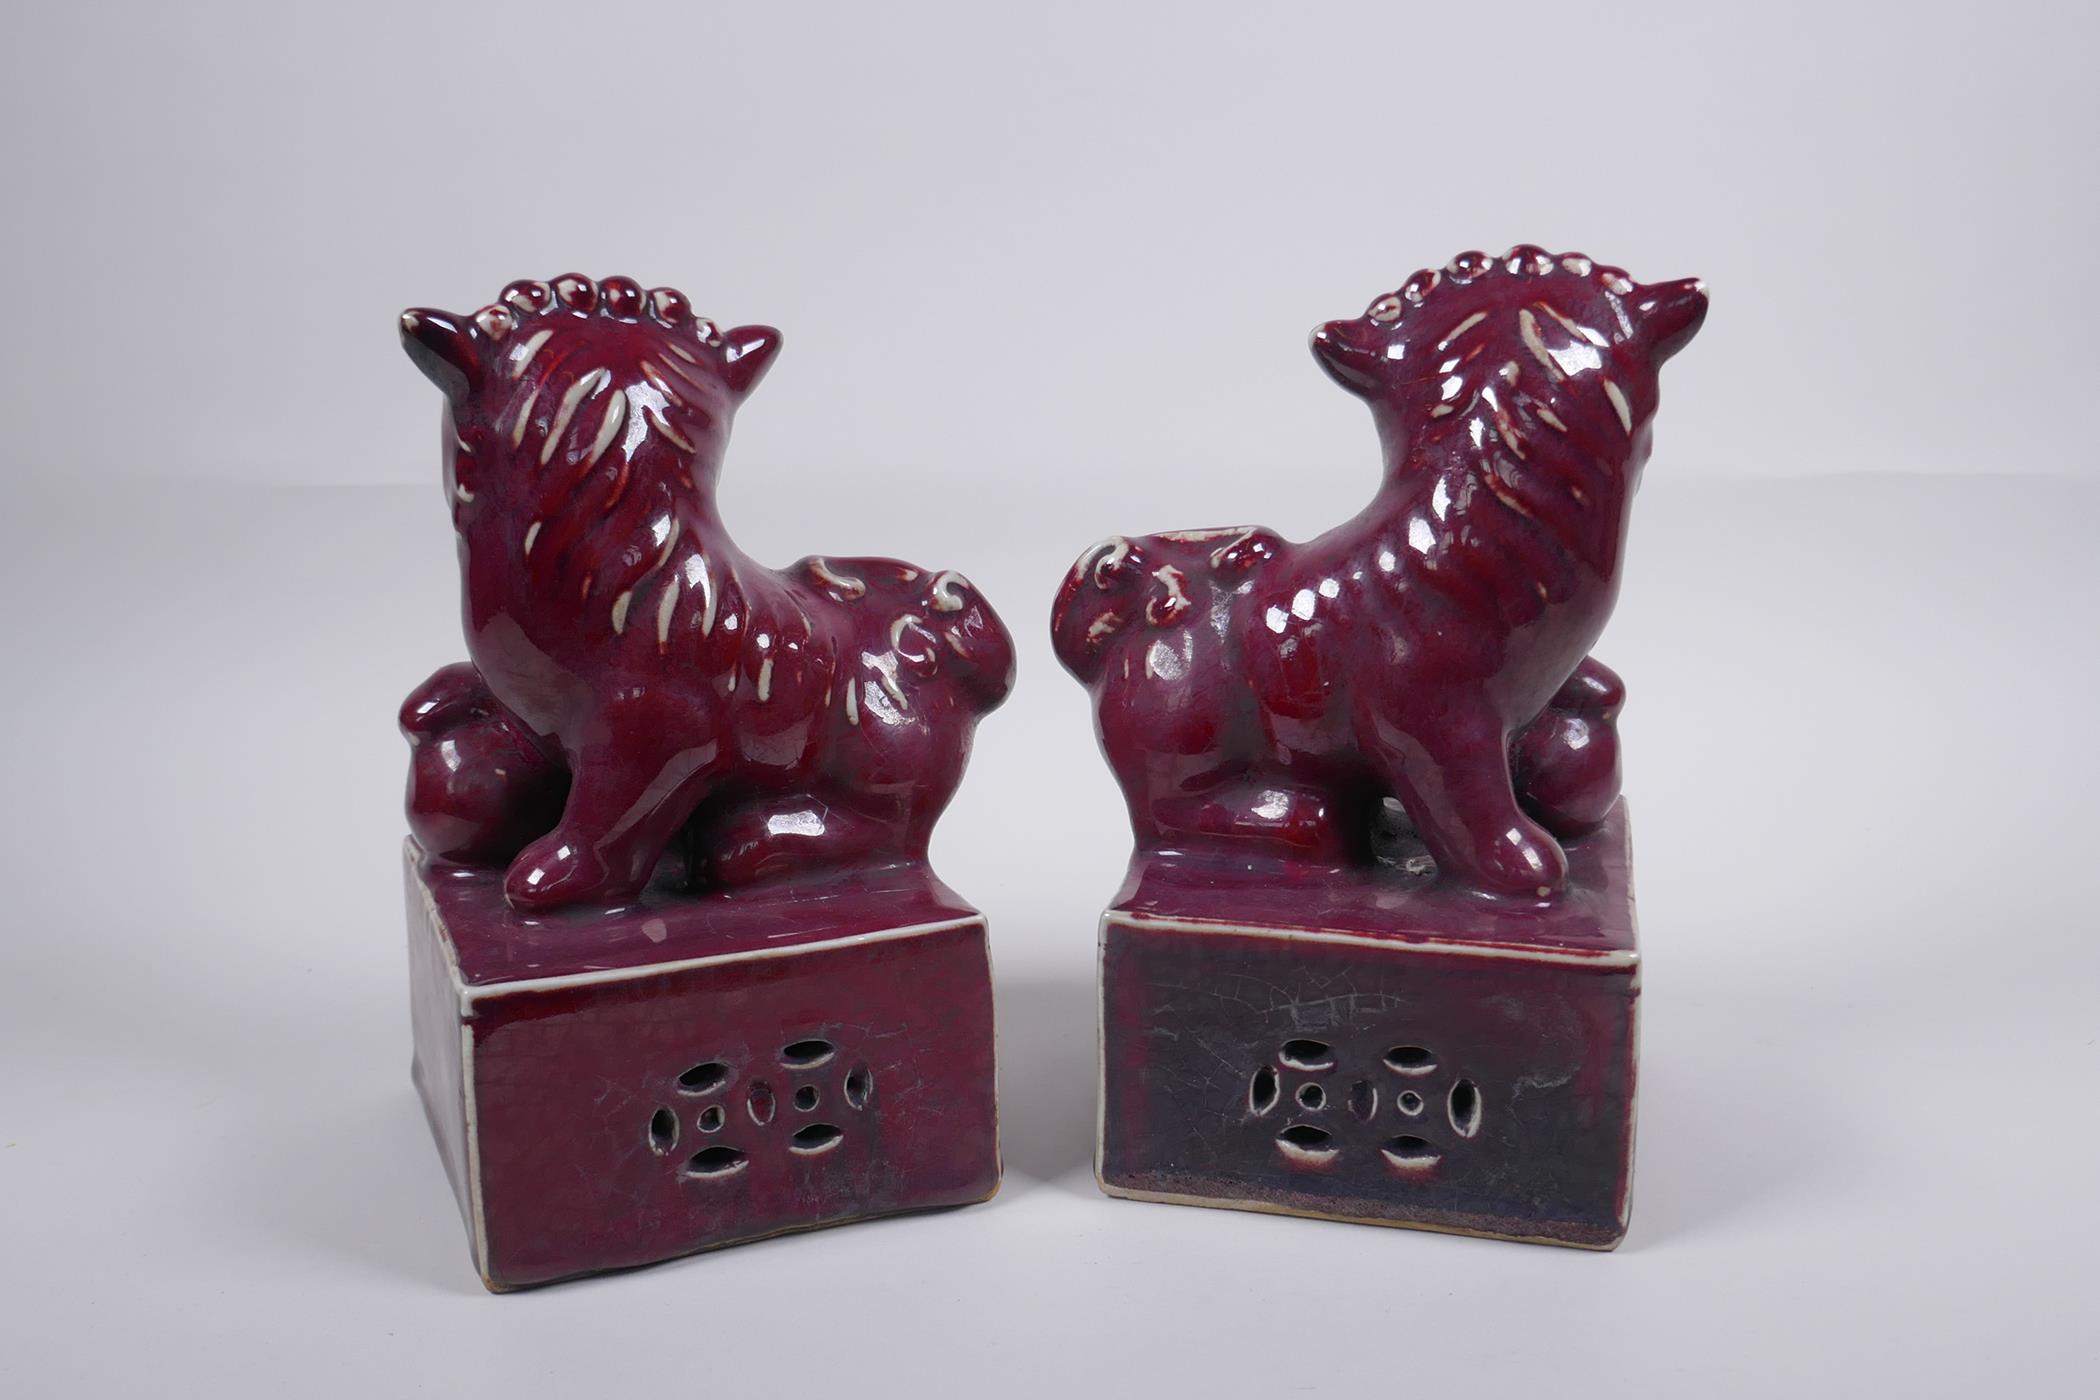 A pair of sang de boeuf glazed porcelain fo dogs, Chinese Xuande 6 character mark, 21cm high - Image 2 of 4